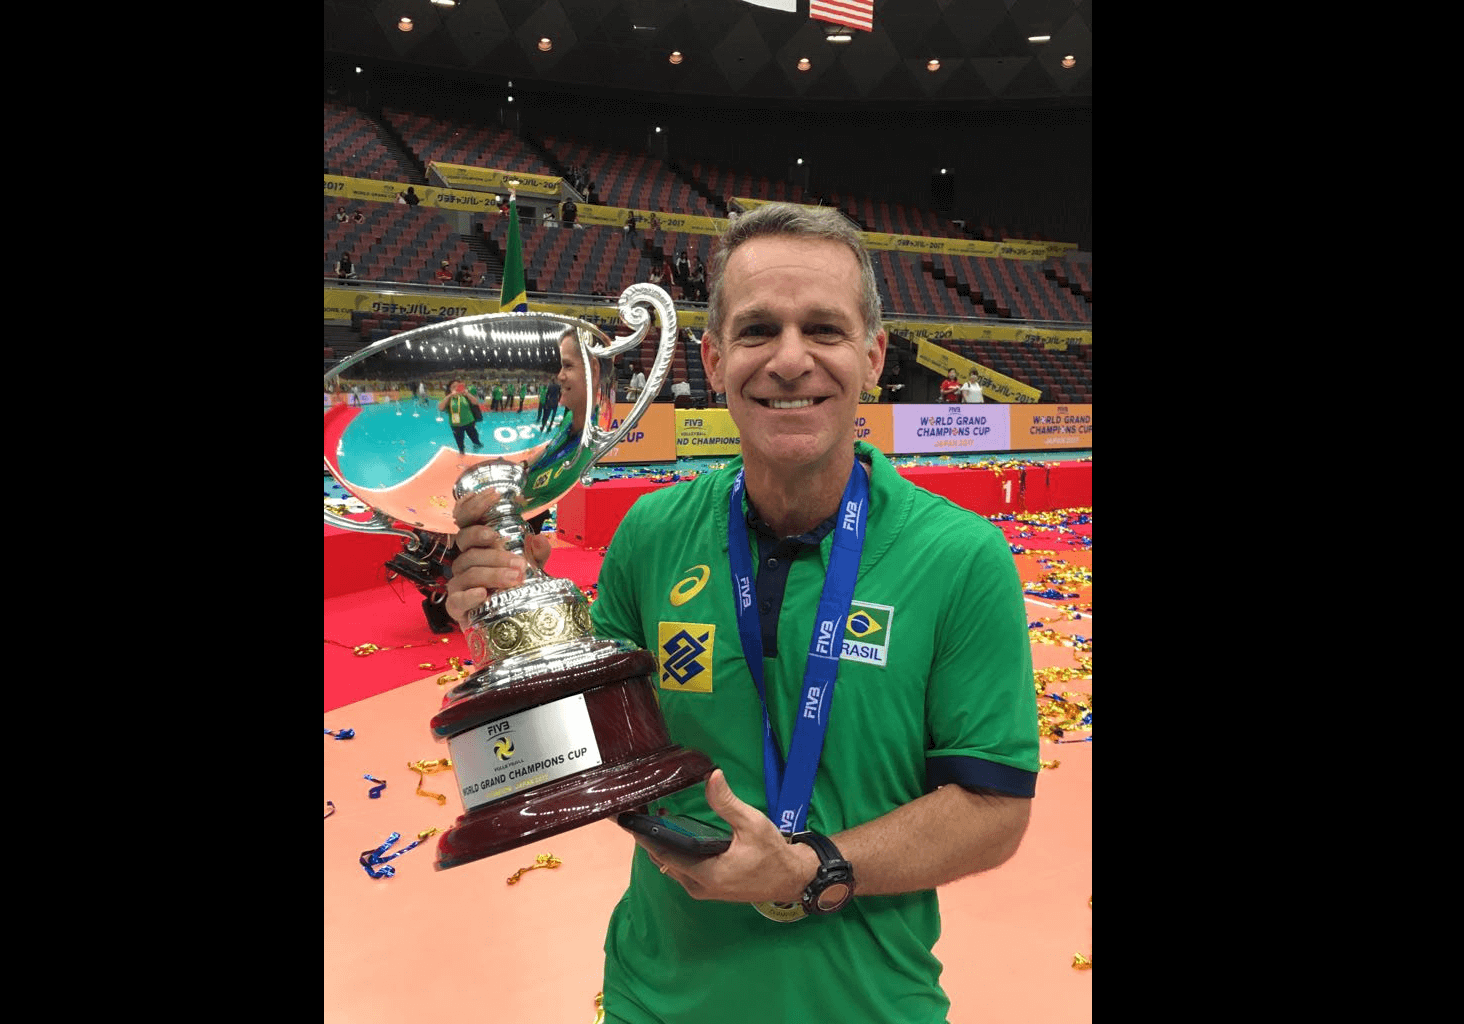 SportsEdTV Adds Another Accomplished Volleyball Coach as Contributor